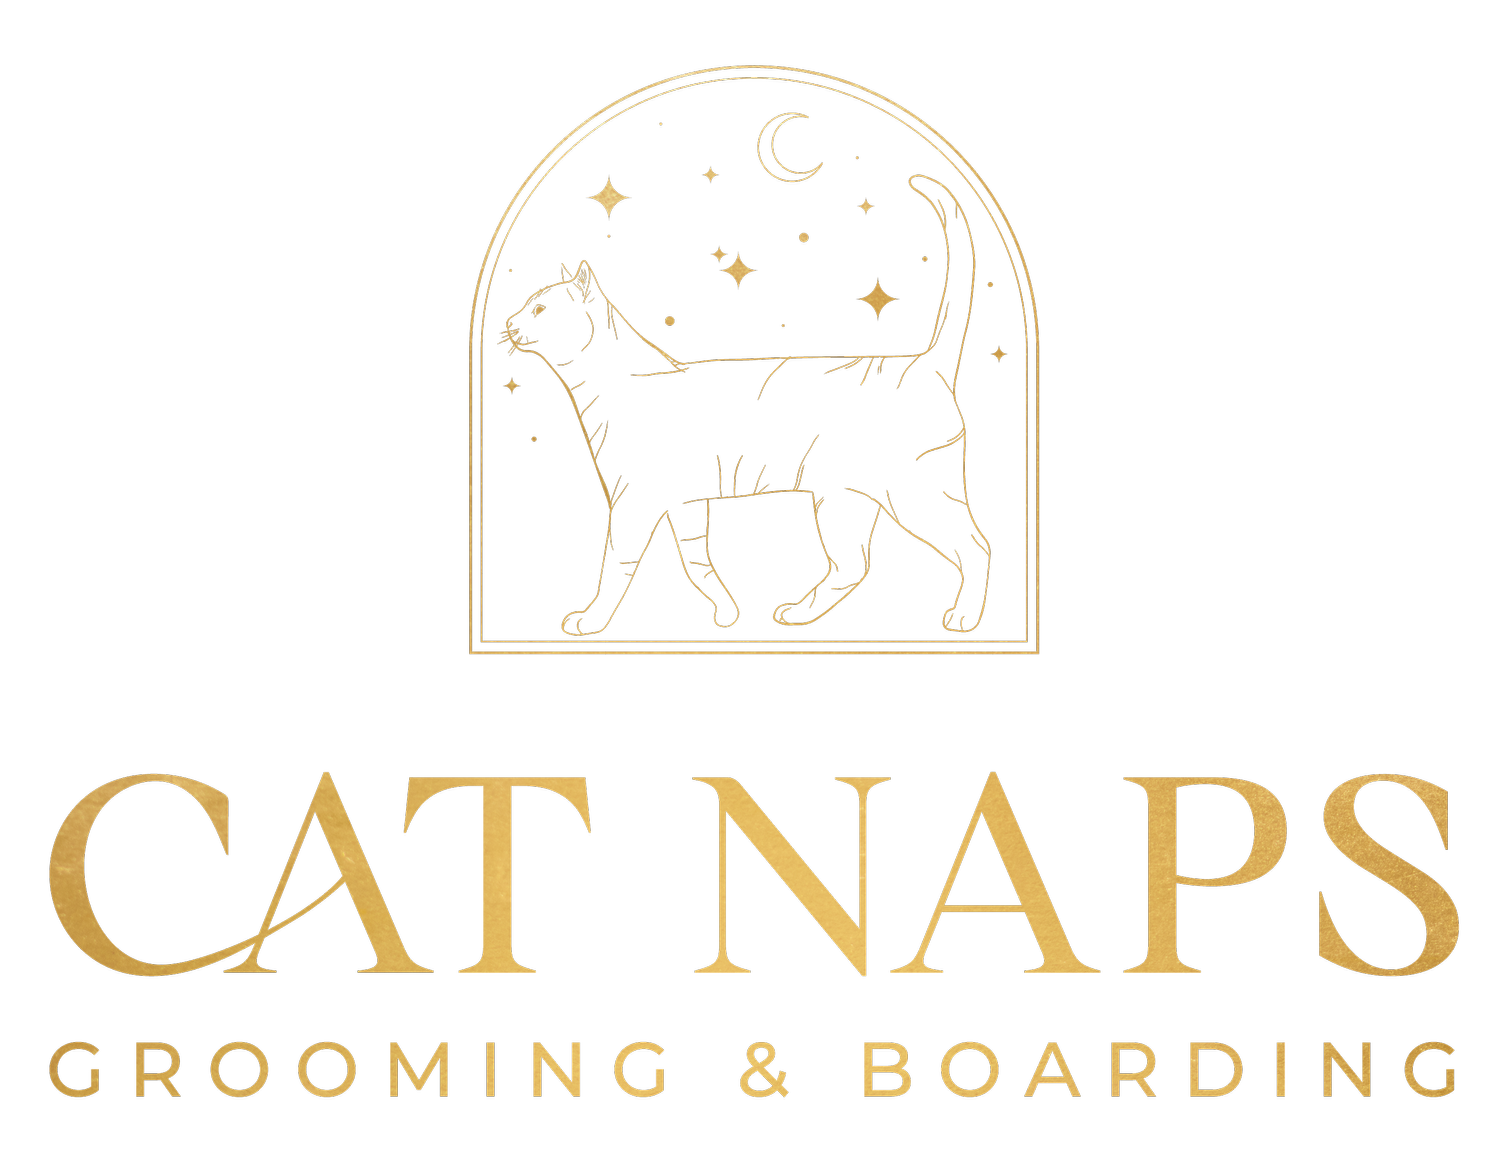 Cat With a Mat  National Cat Groomers Institute